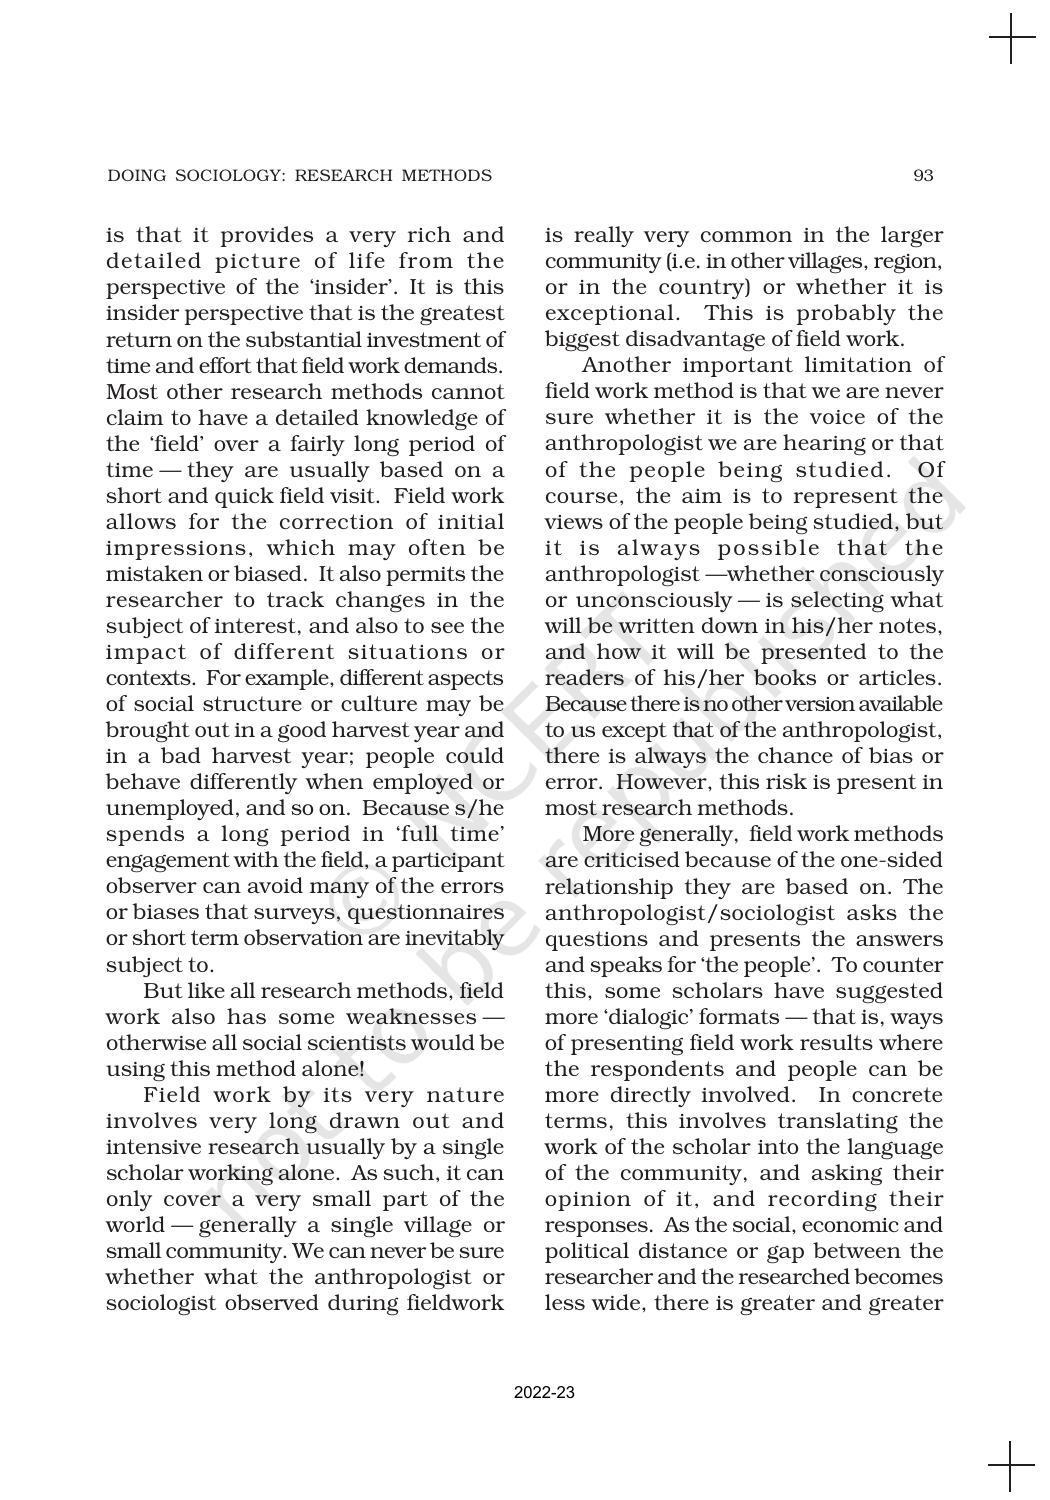 NCERT Book for Class 11 Sociology (Part-I) Chapter 5 Doing Sociology: Research Methods - Page 12